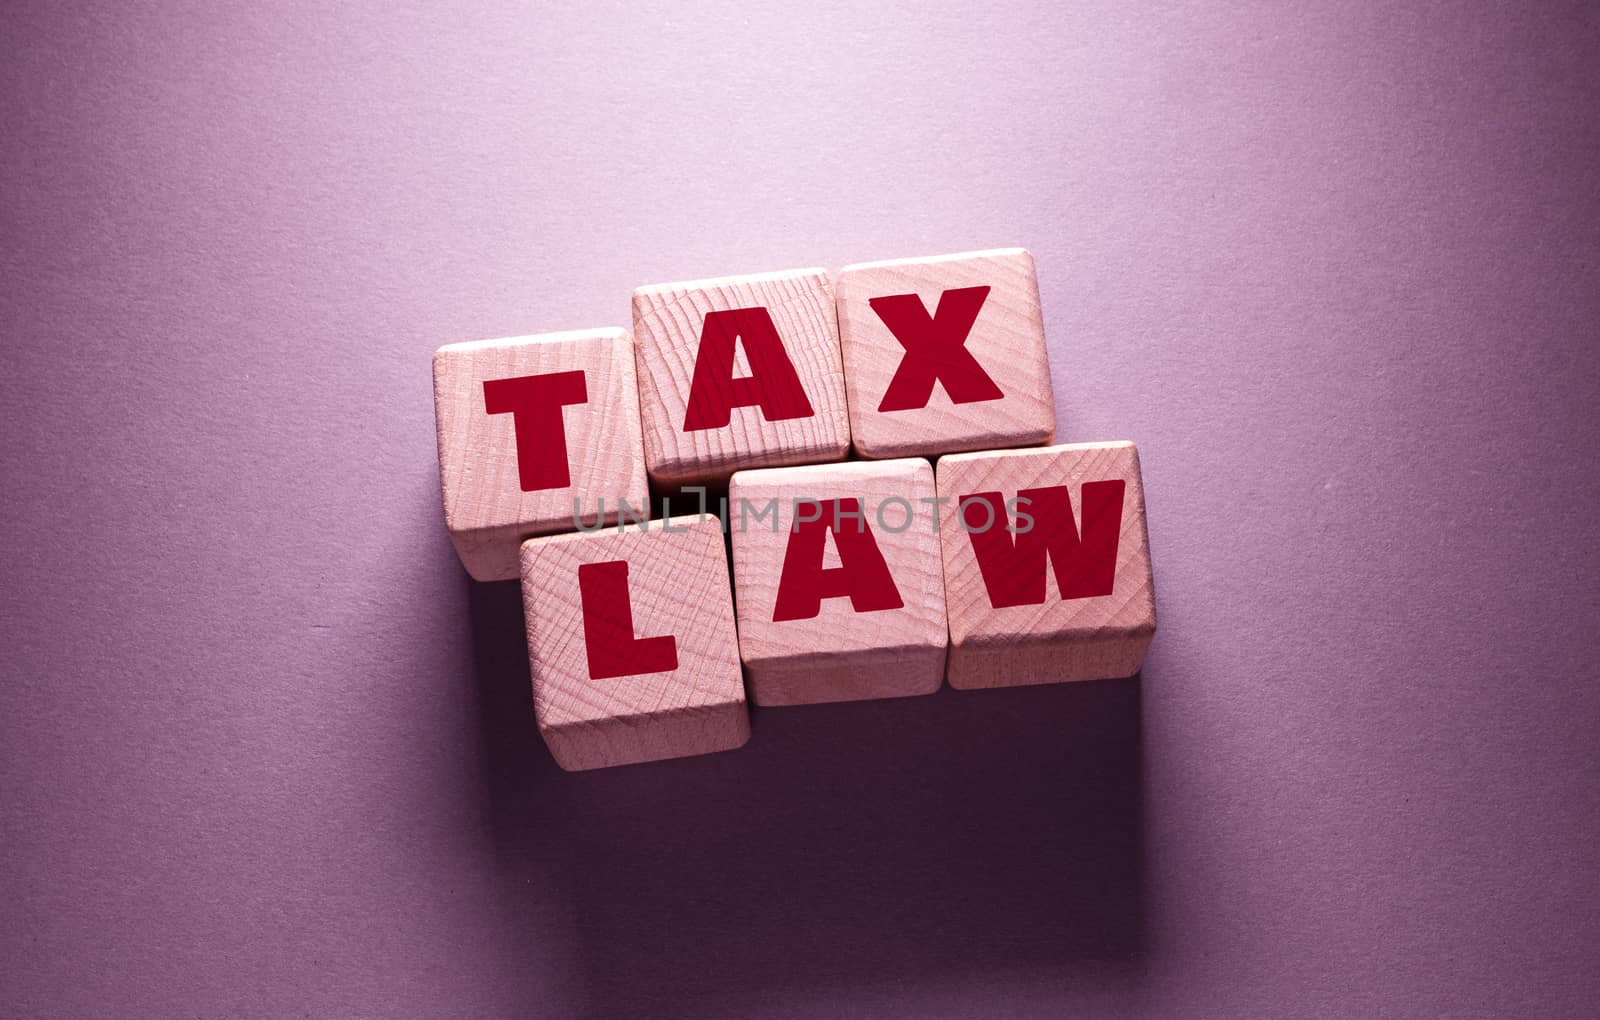 Tax Law Word with Wooden Cubes by Jievani